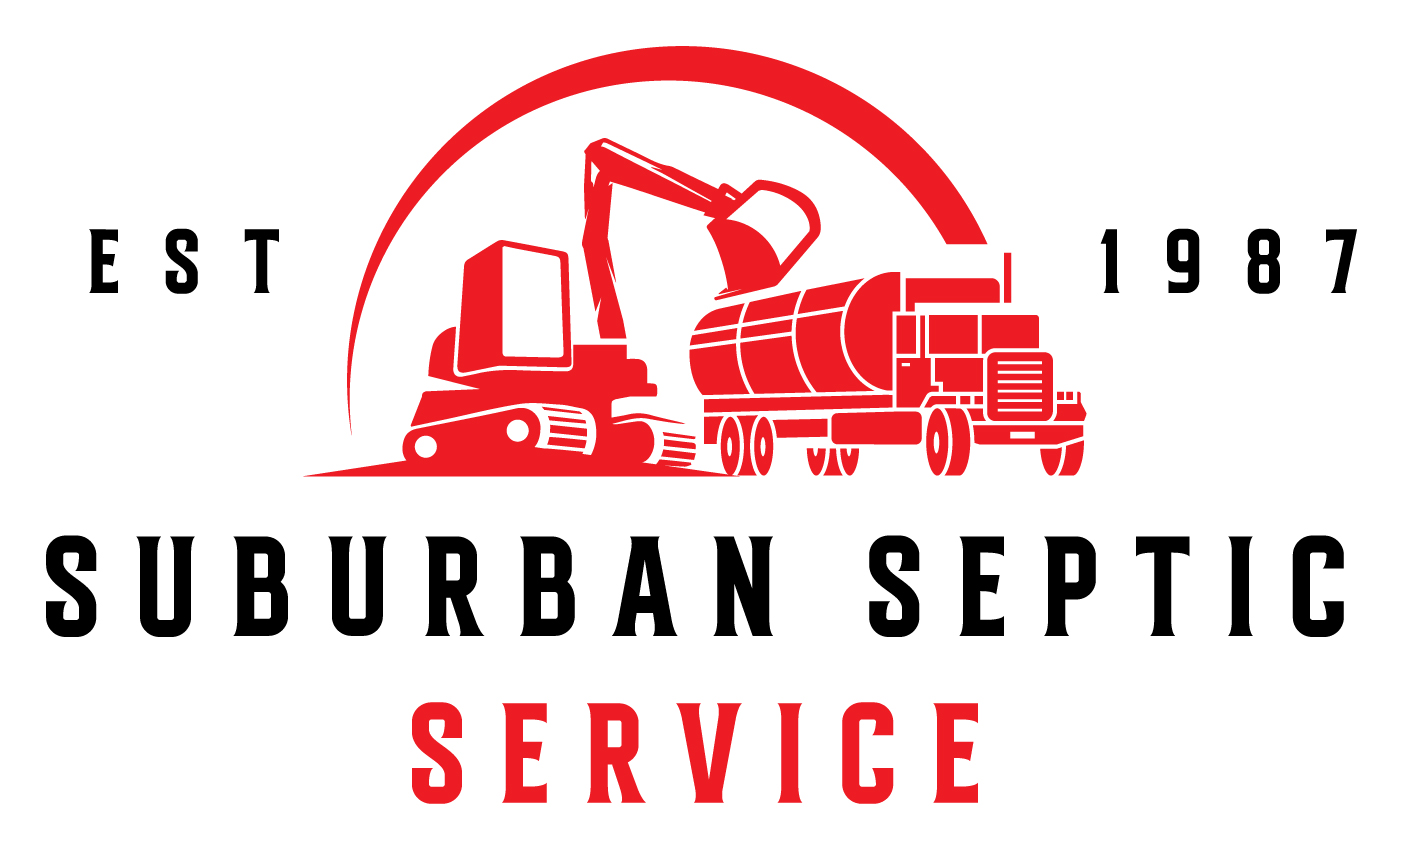 Suburban Septic Service - Family-Owned & Operated Full Service Septic Company Since 1987